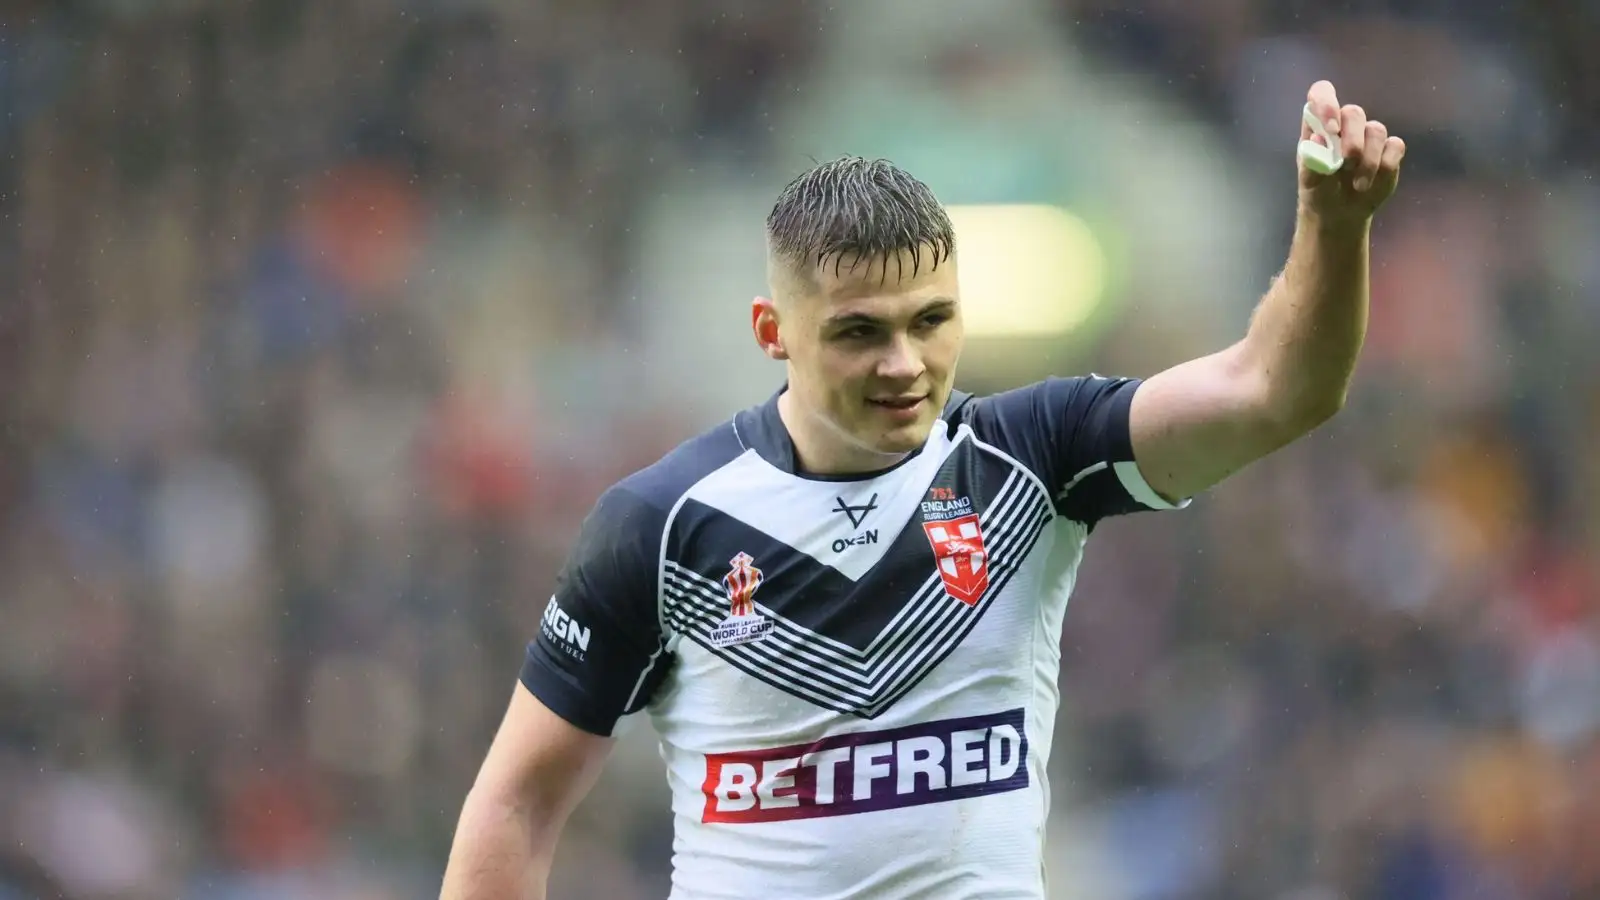 Jack Welsby to become England’s youngest-ever captain in familiar territory; St Helens star ‘extremely humbled’